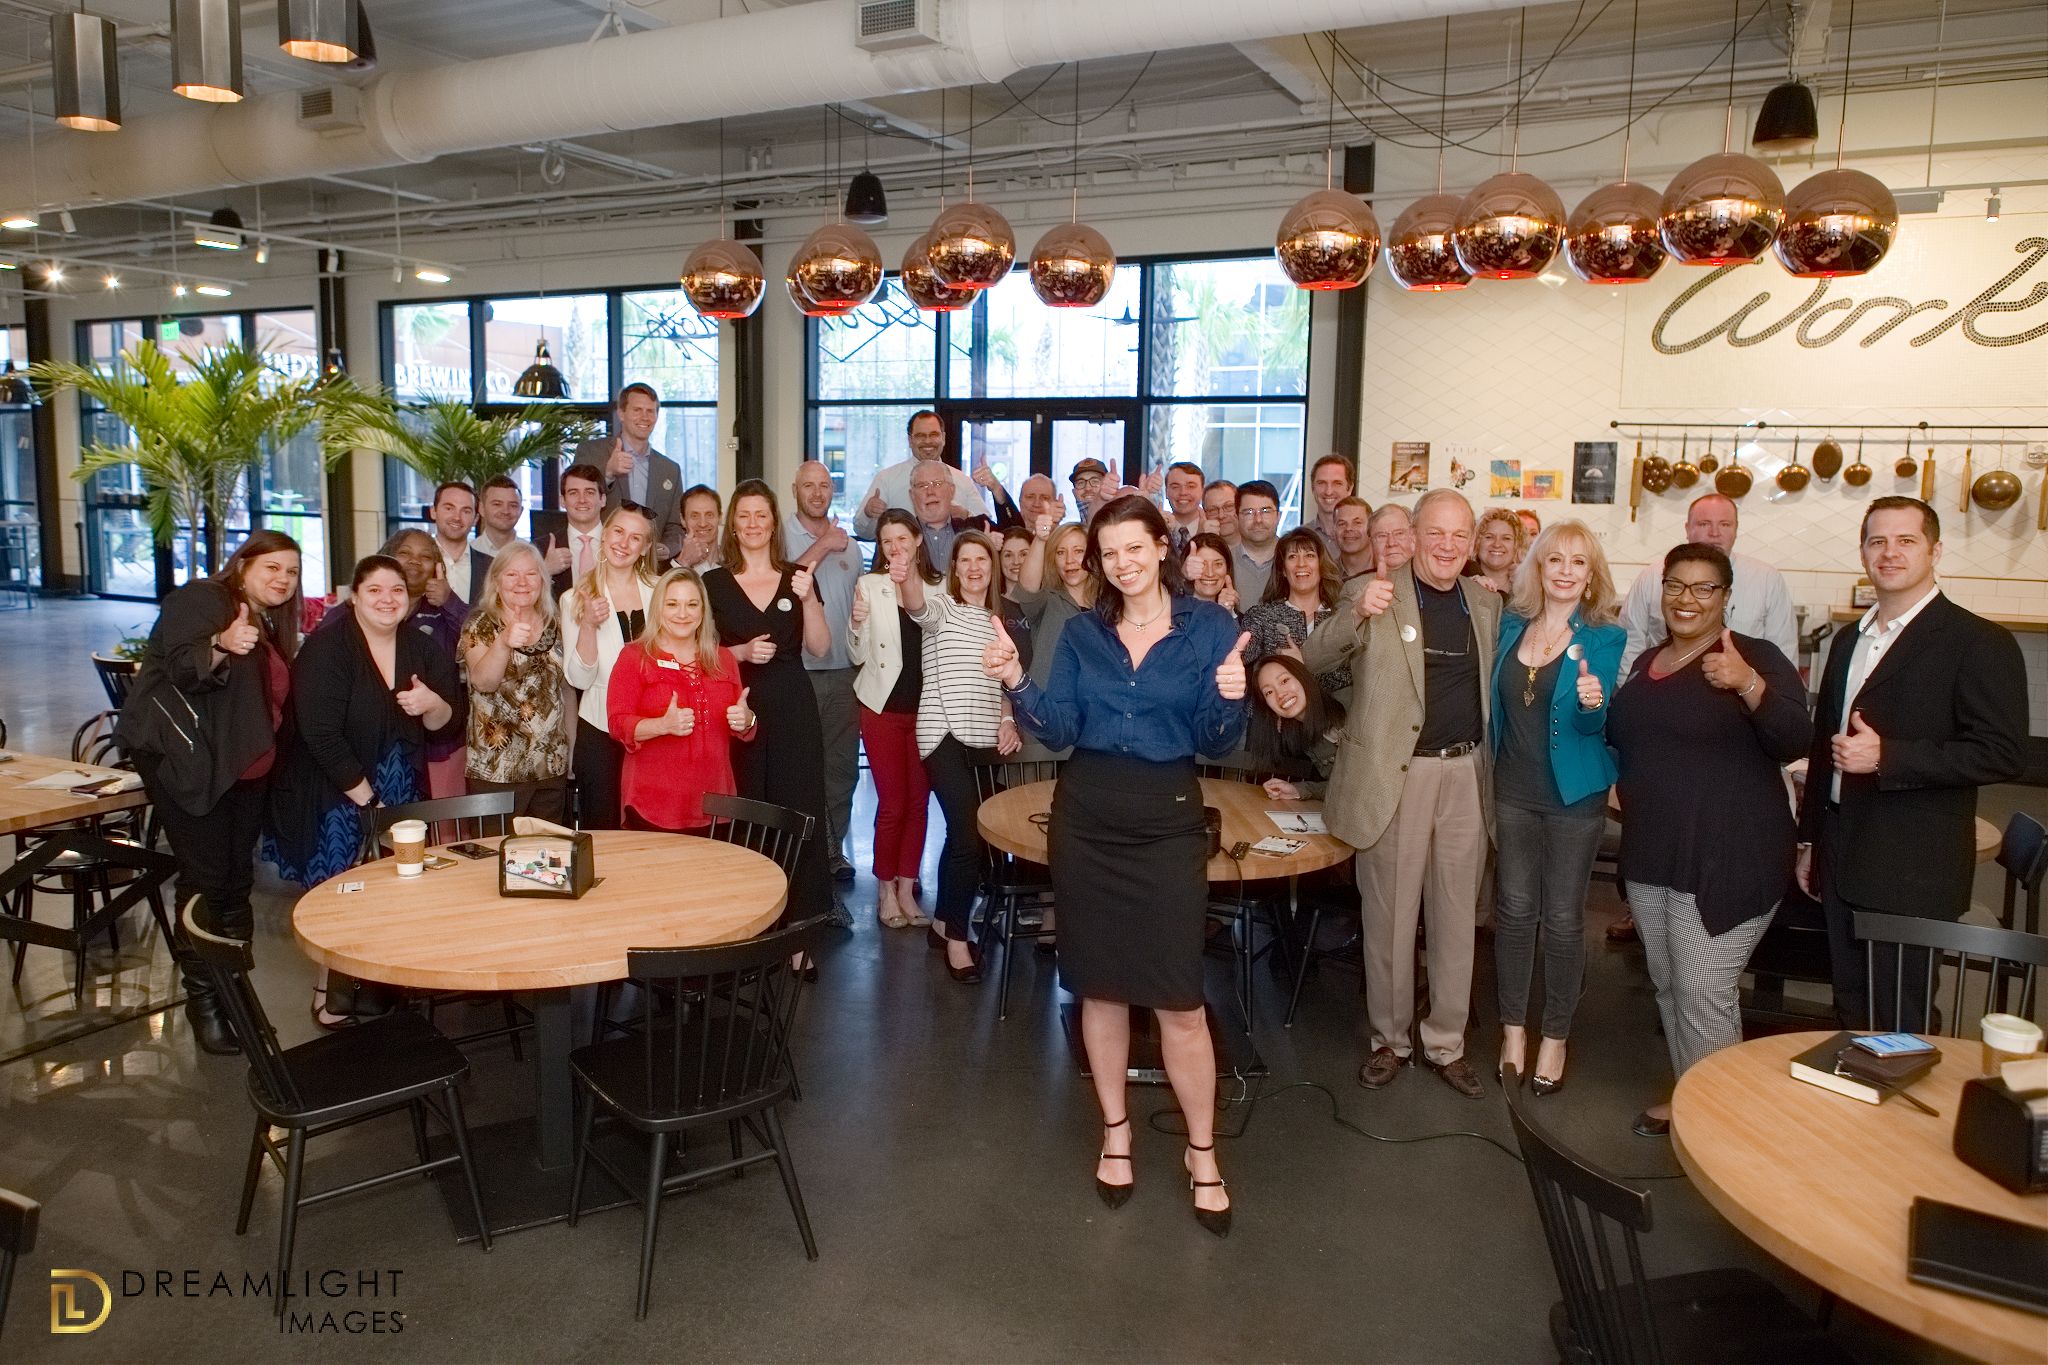 Sales Society Meeting. Event Photograph by DreamLight Images, Charleston Feb 2019.